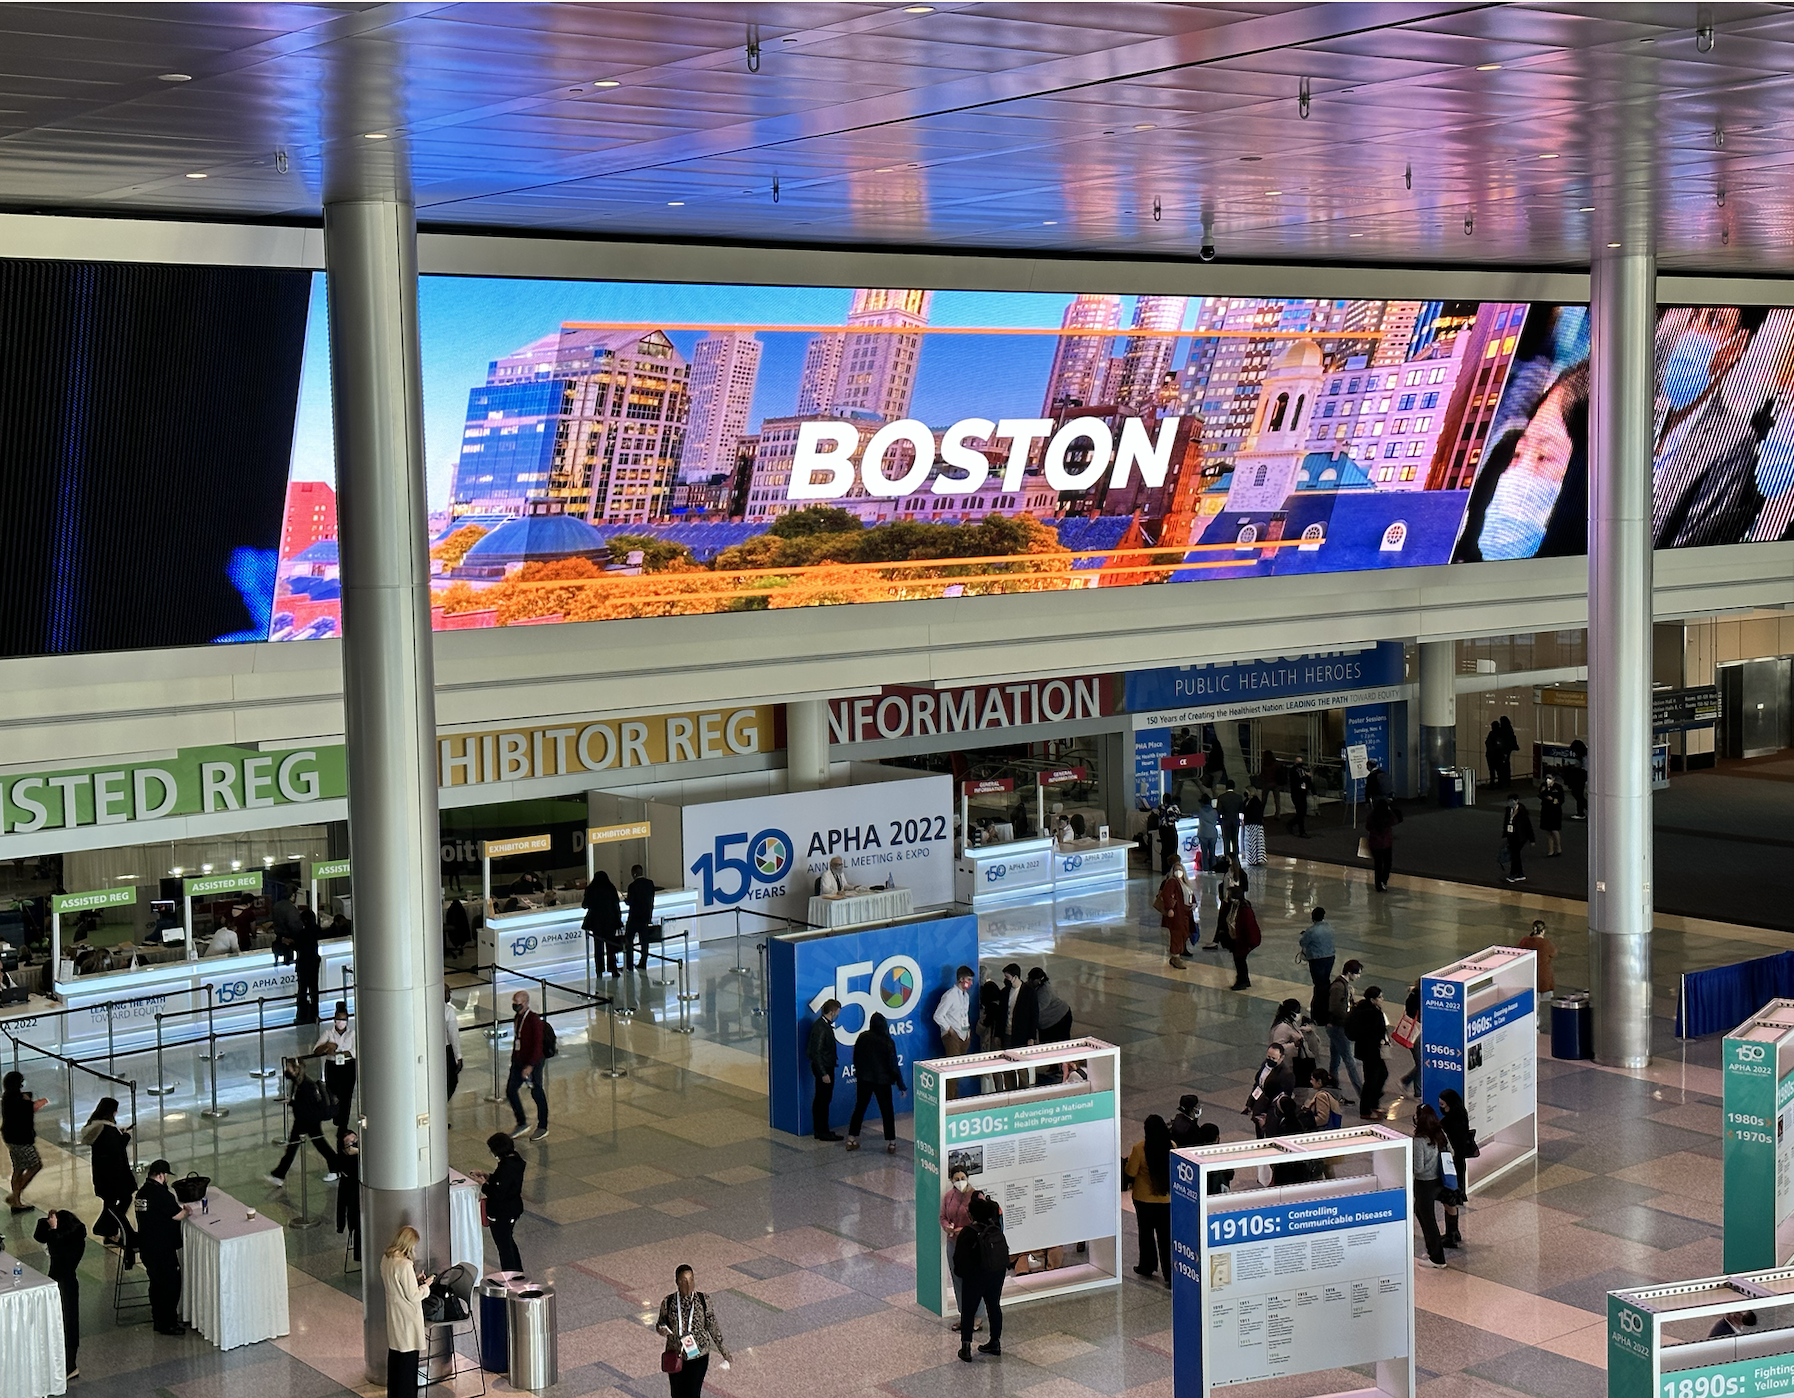 An image of APHA conference in Boston